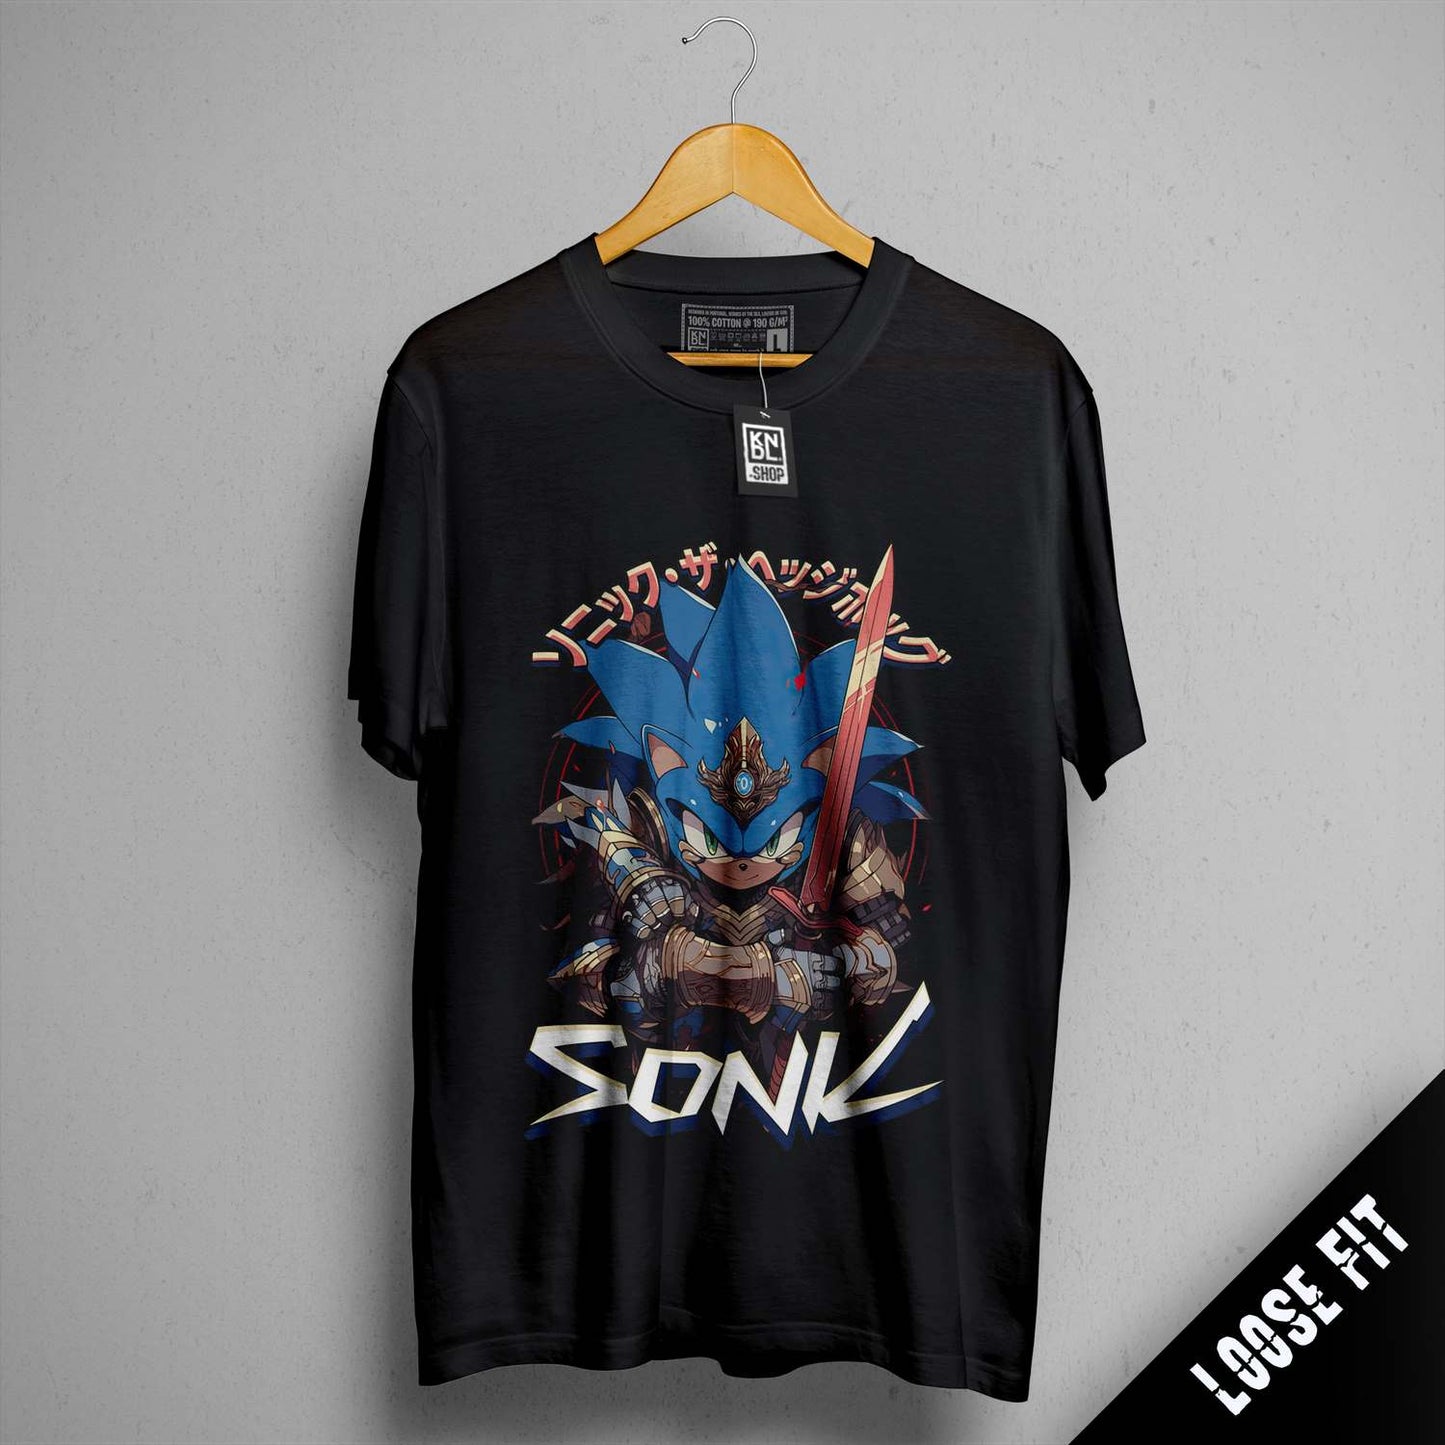 a black shirt with a picture of sonic on it